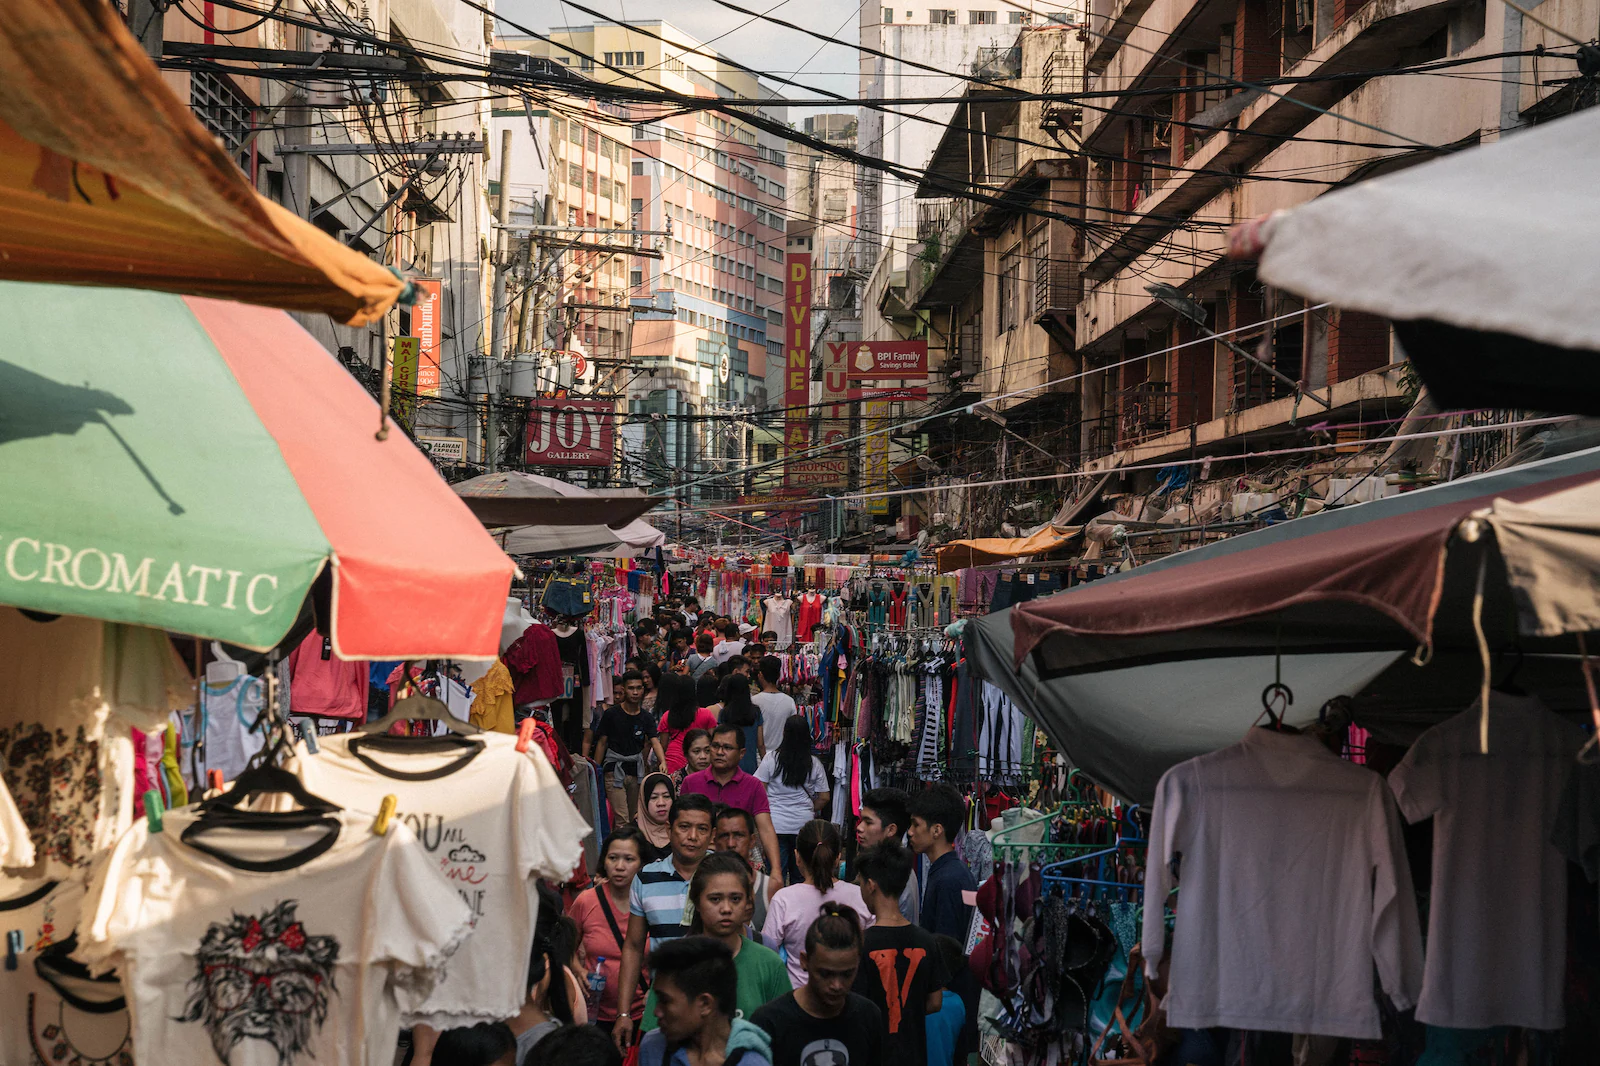 On the streets of Divisoria Market